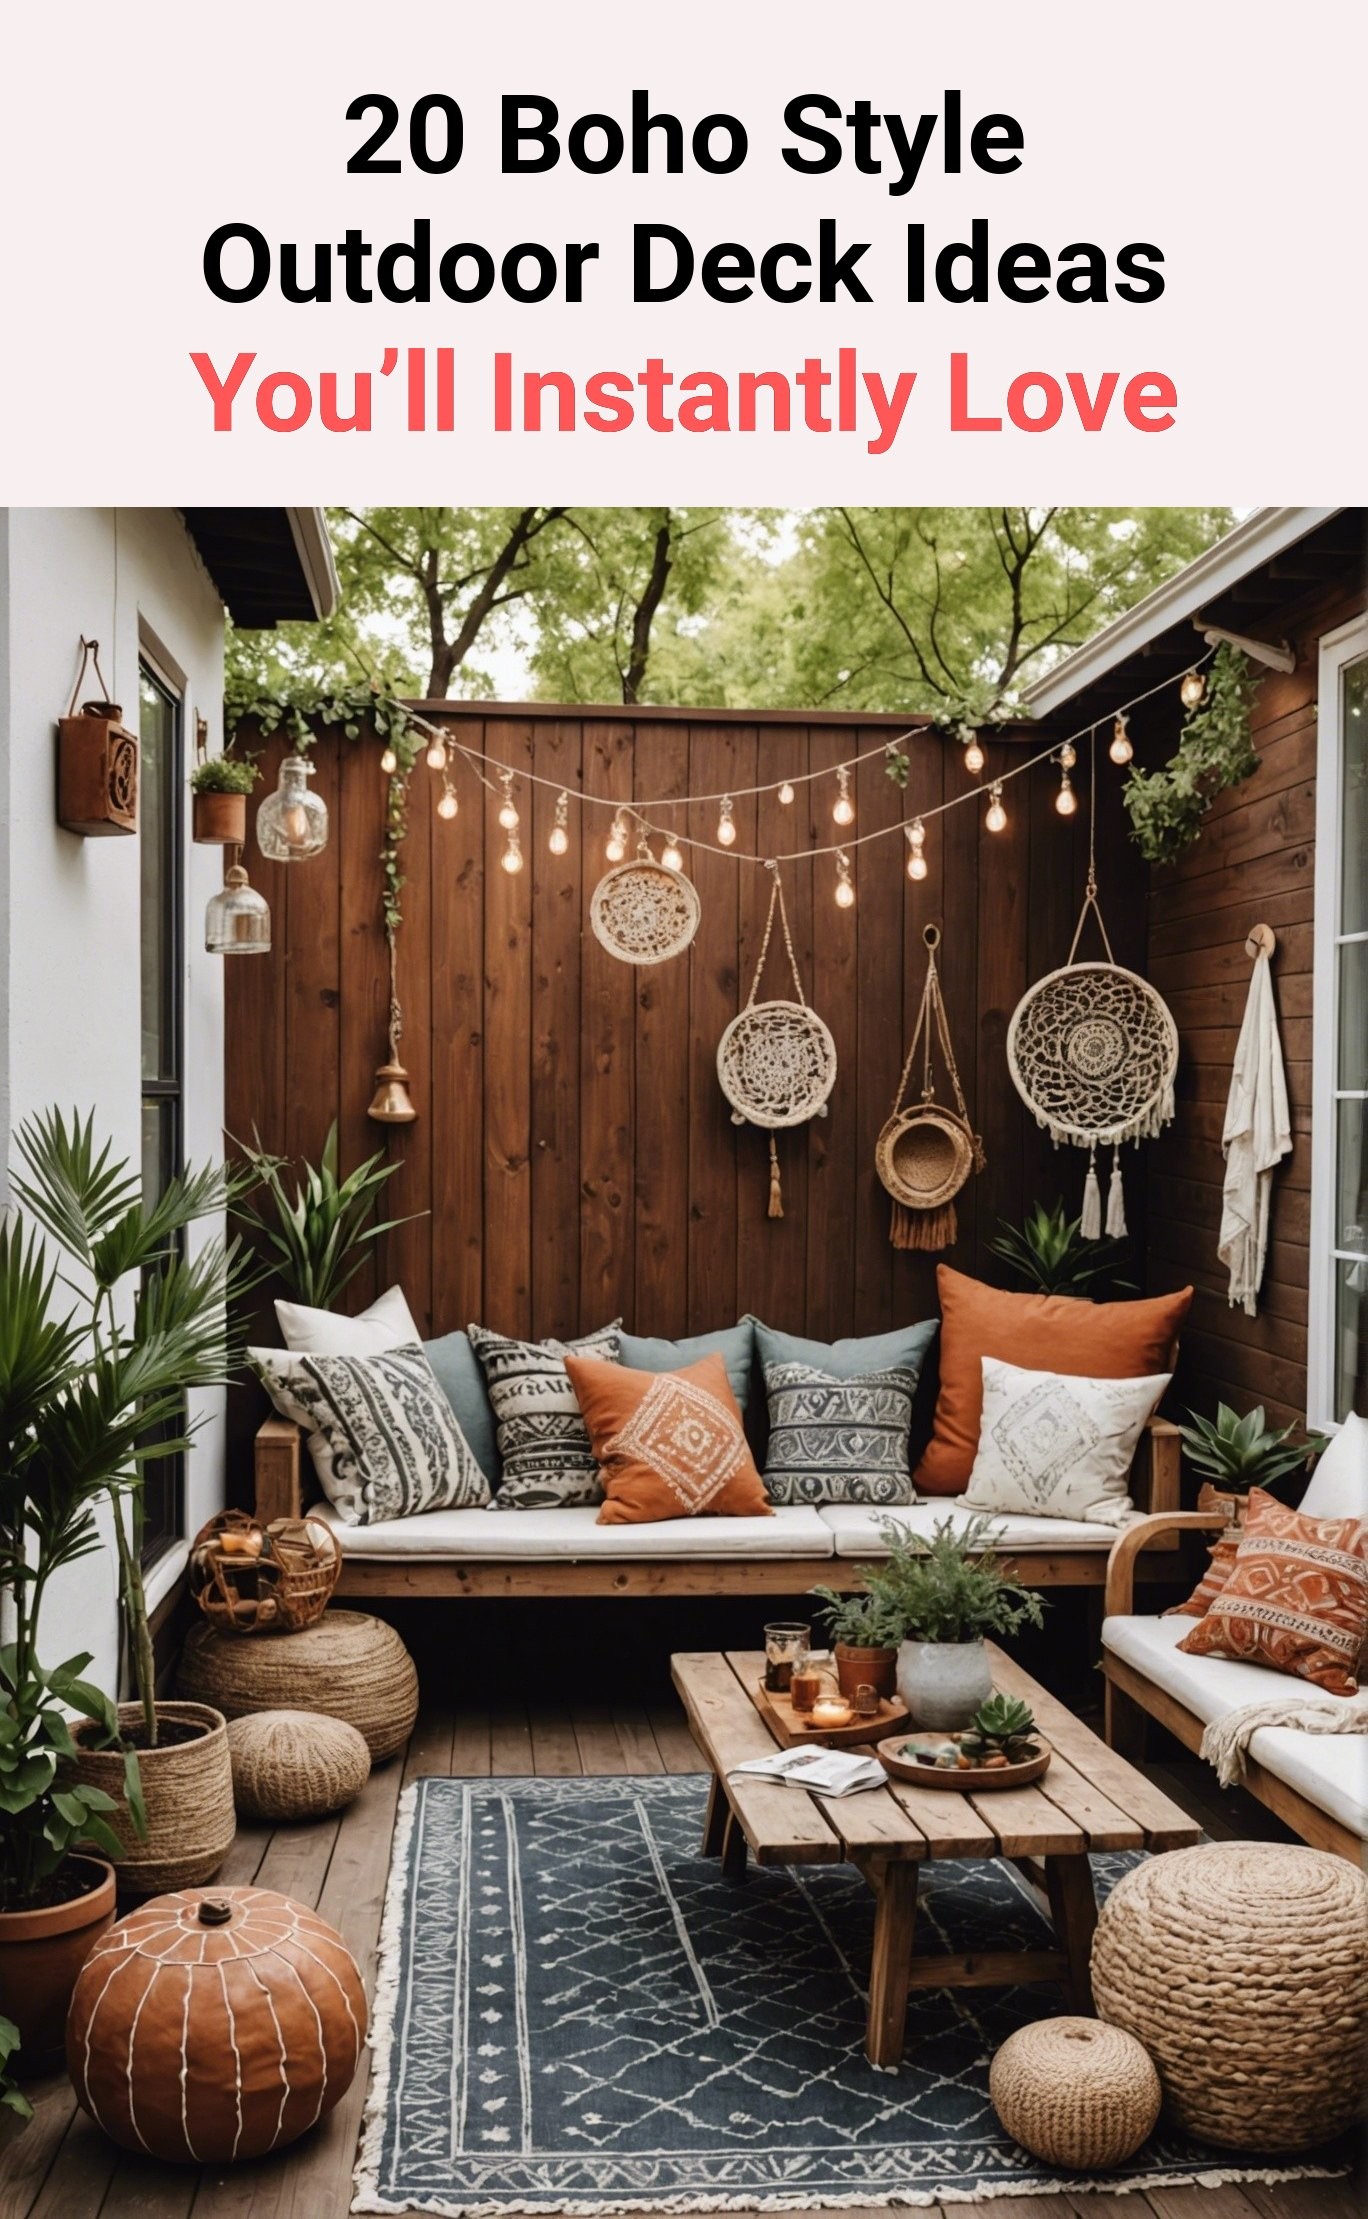 20 Boho Style Outdoor Deck Ideas You’ll Instantly Love